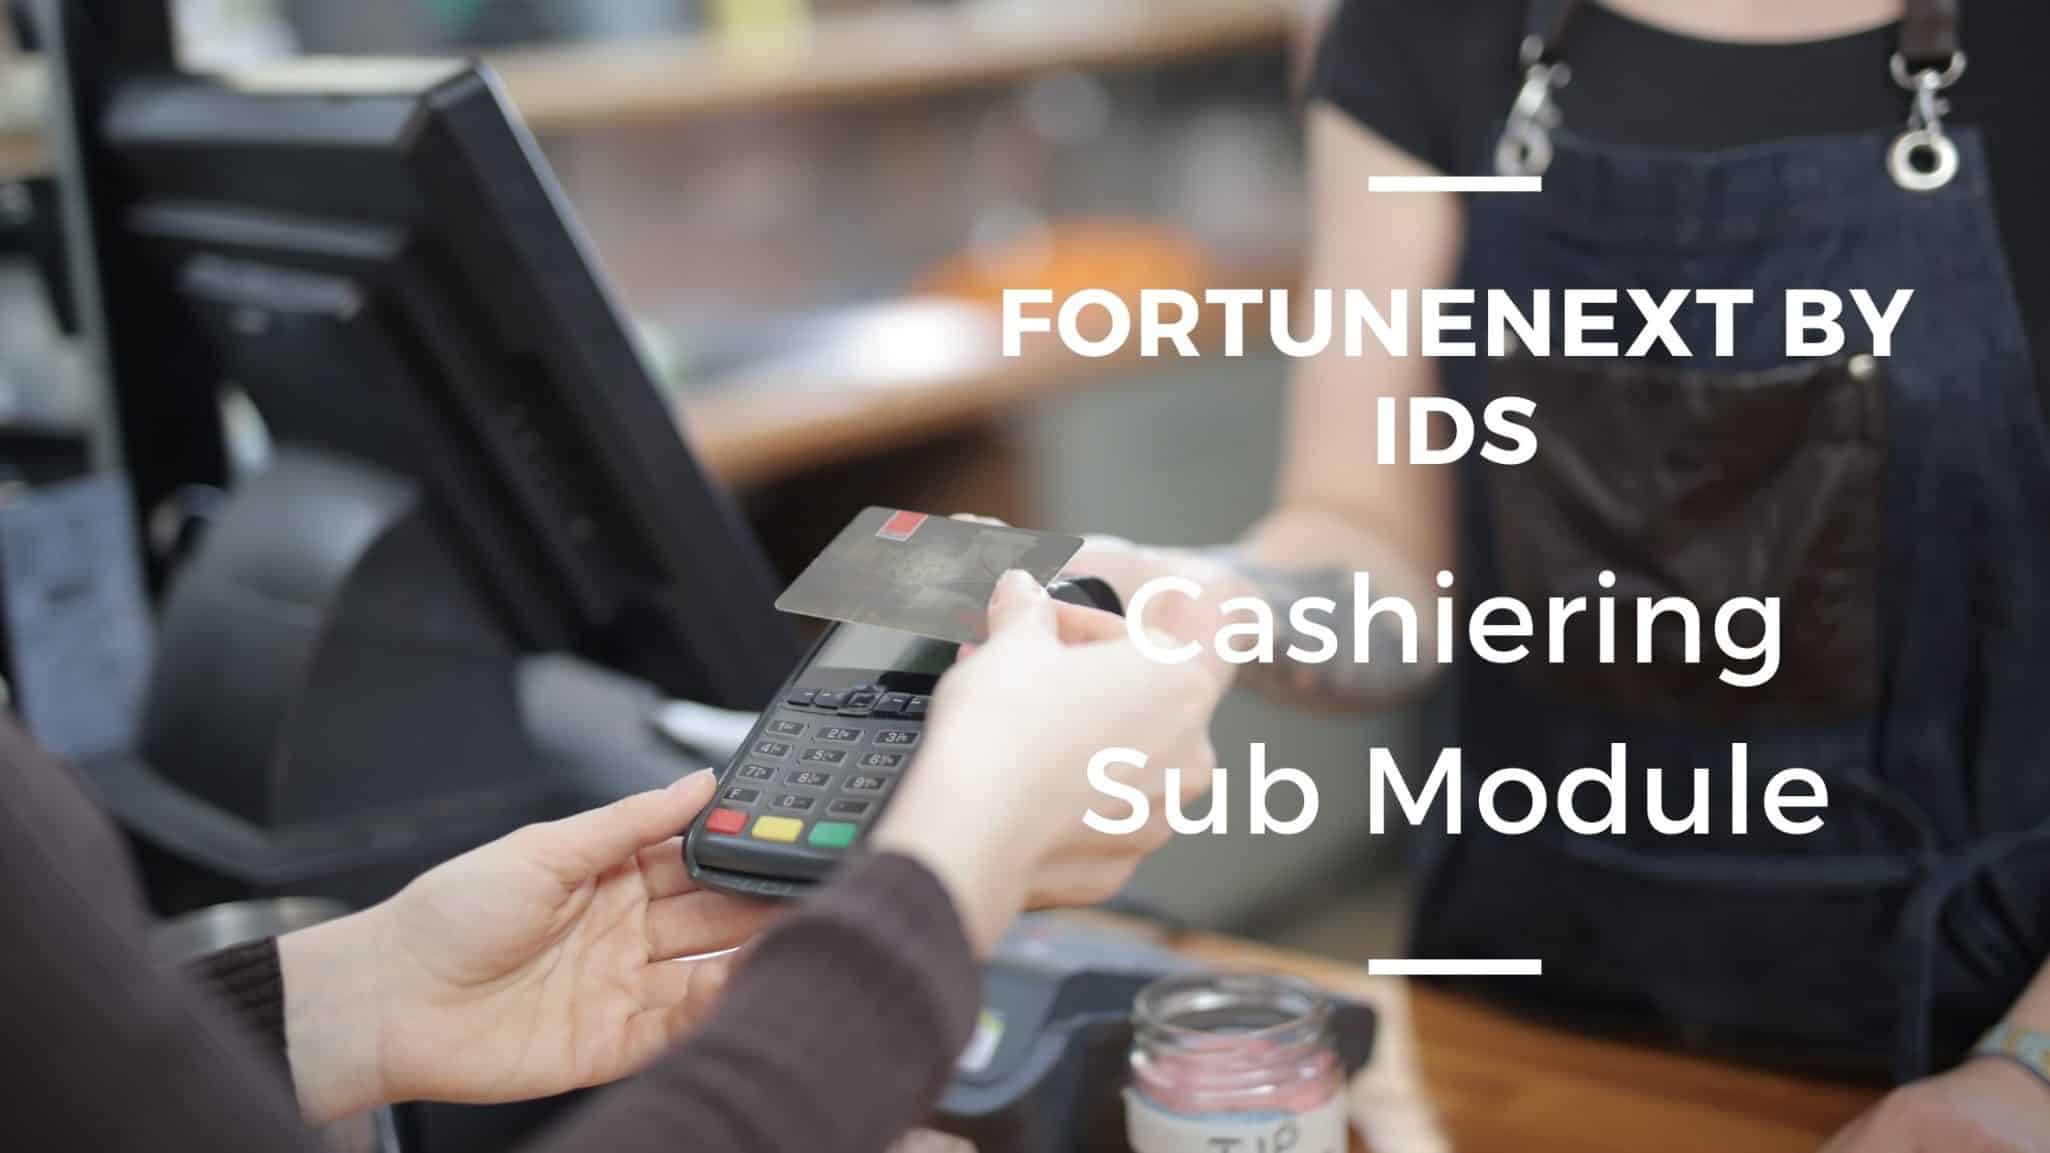 Fortune Next by IDS- Cashiering